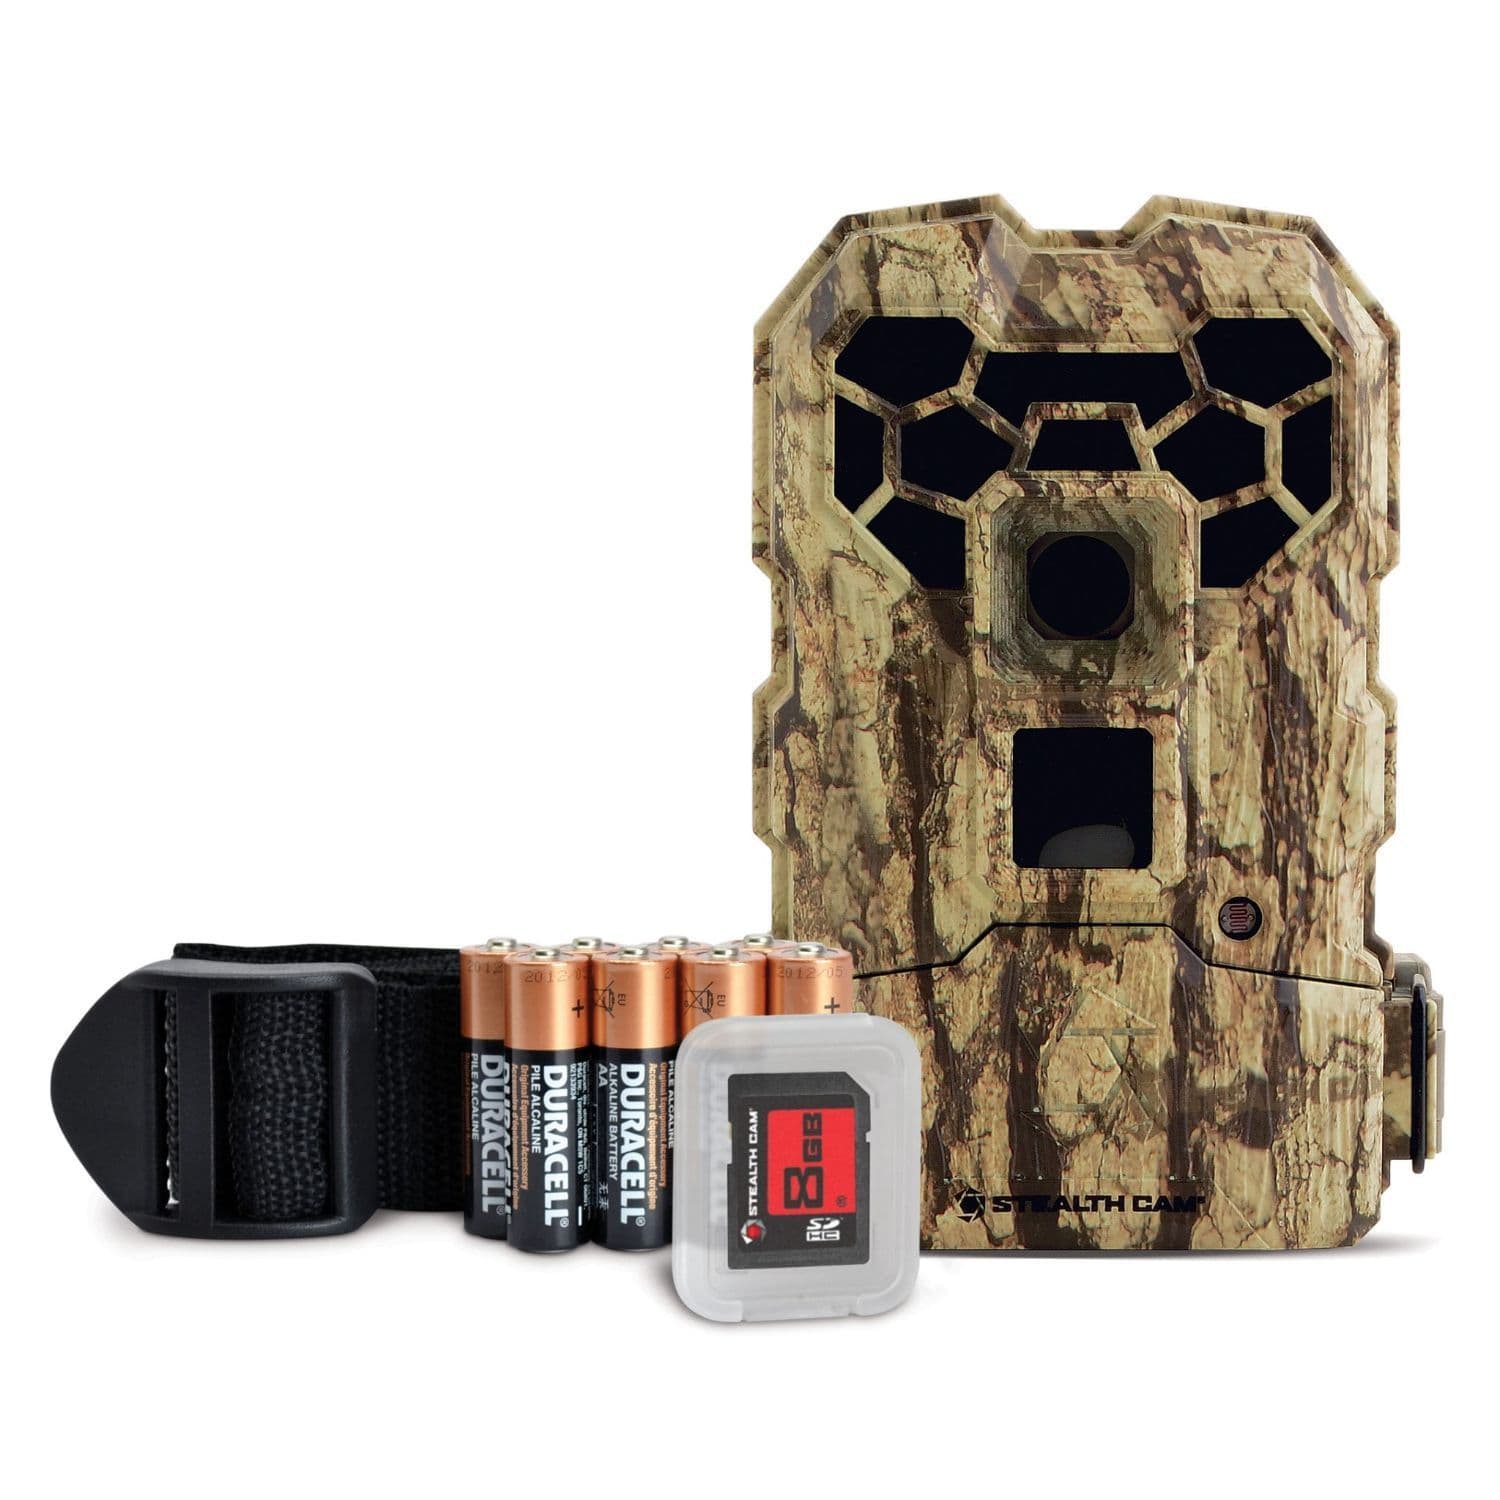 GSM Outdoors Hunting : Game Cameras Stealth Cam QS24 14 MP No Glo Camera w Batteries and SD